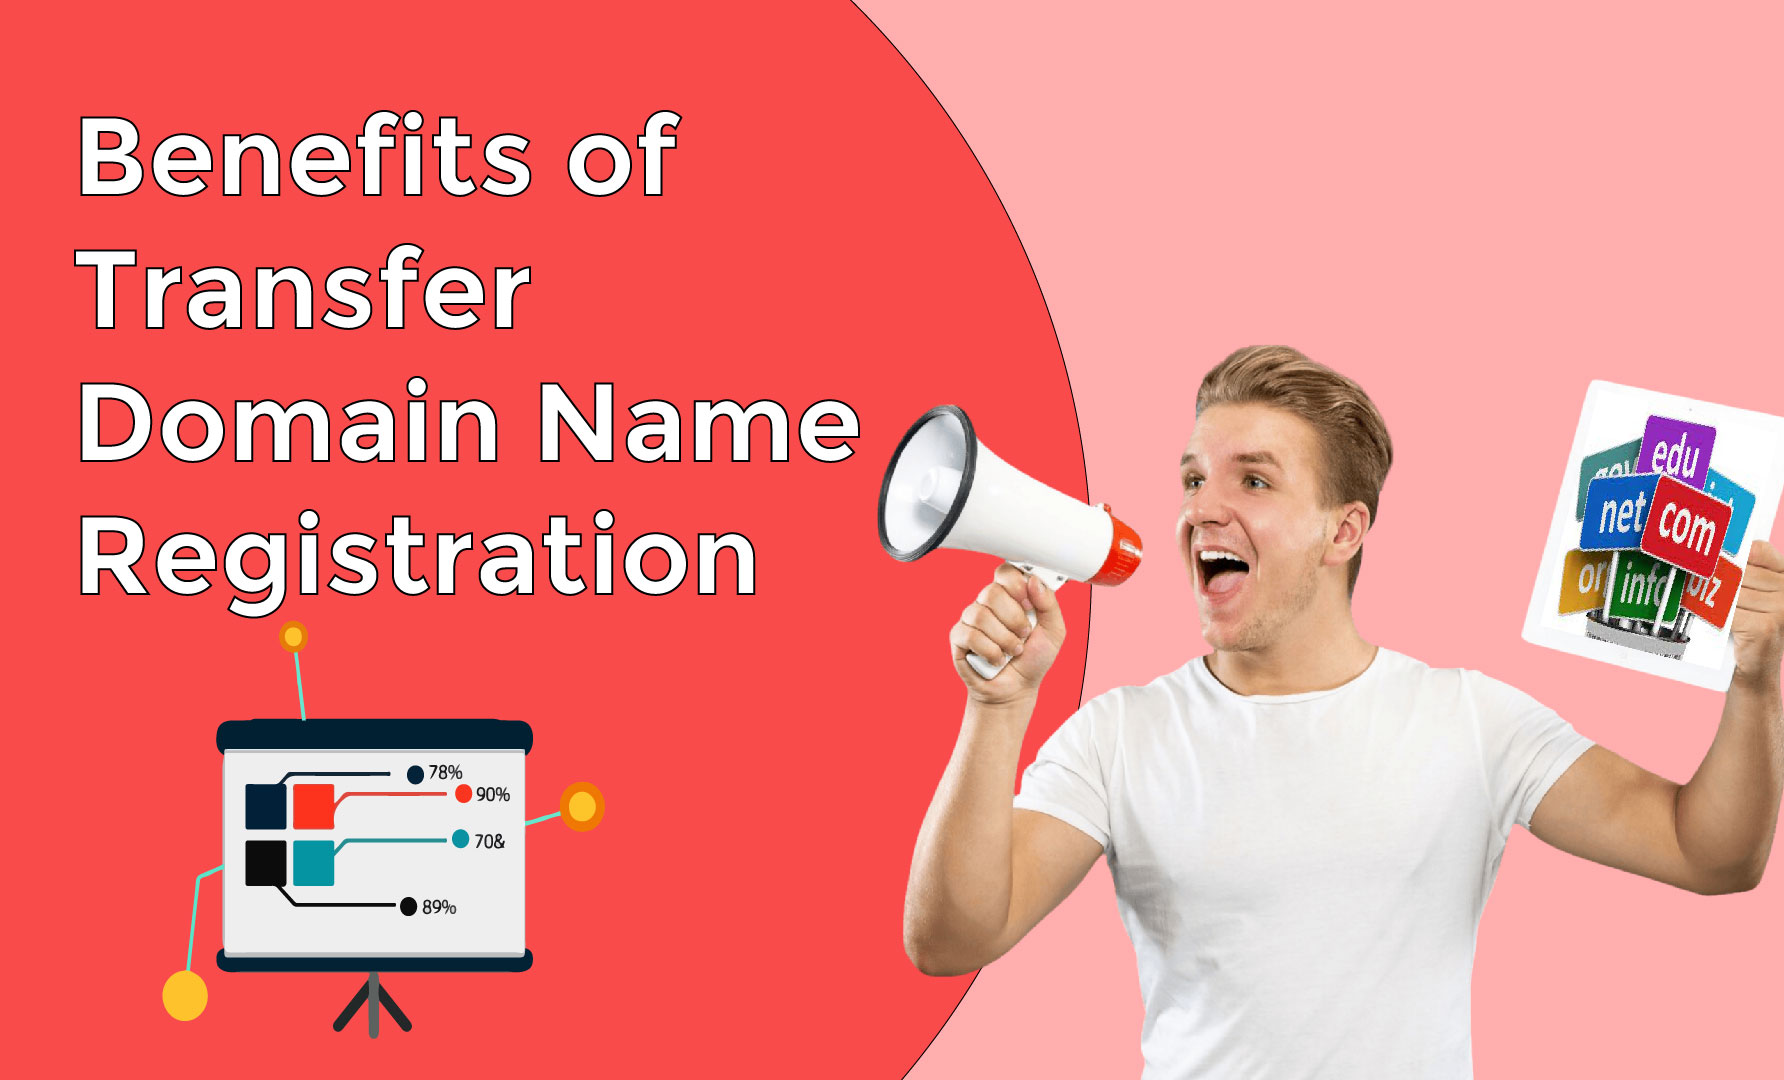 Boost Your Brand: Benefits of Transfer Domain Name Registration